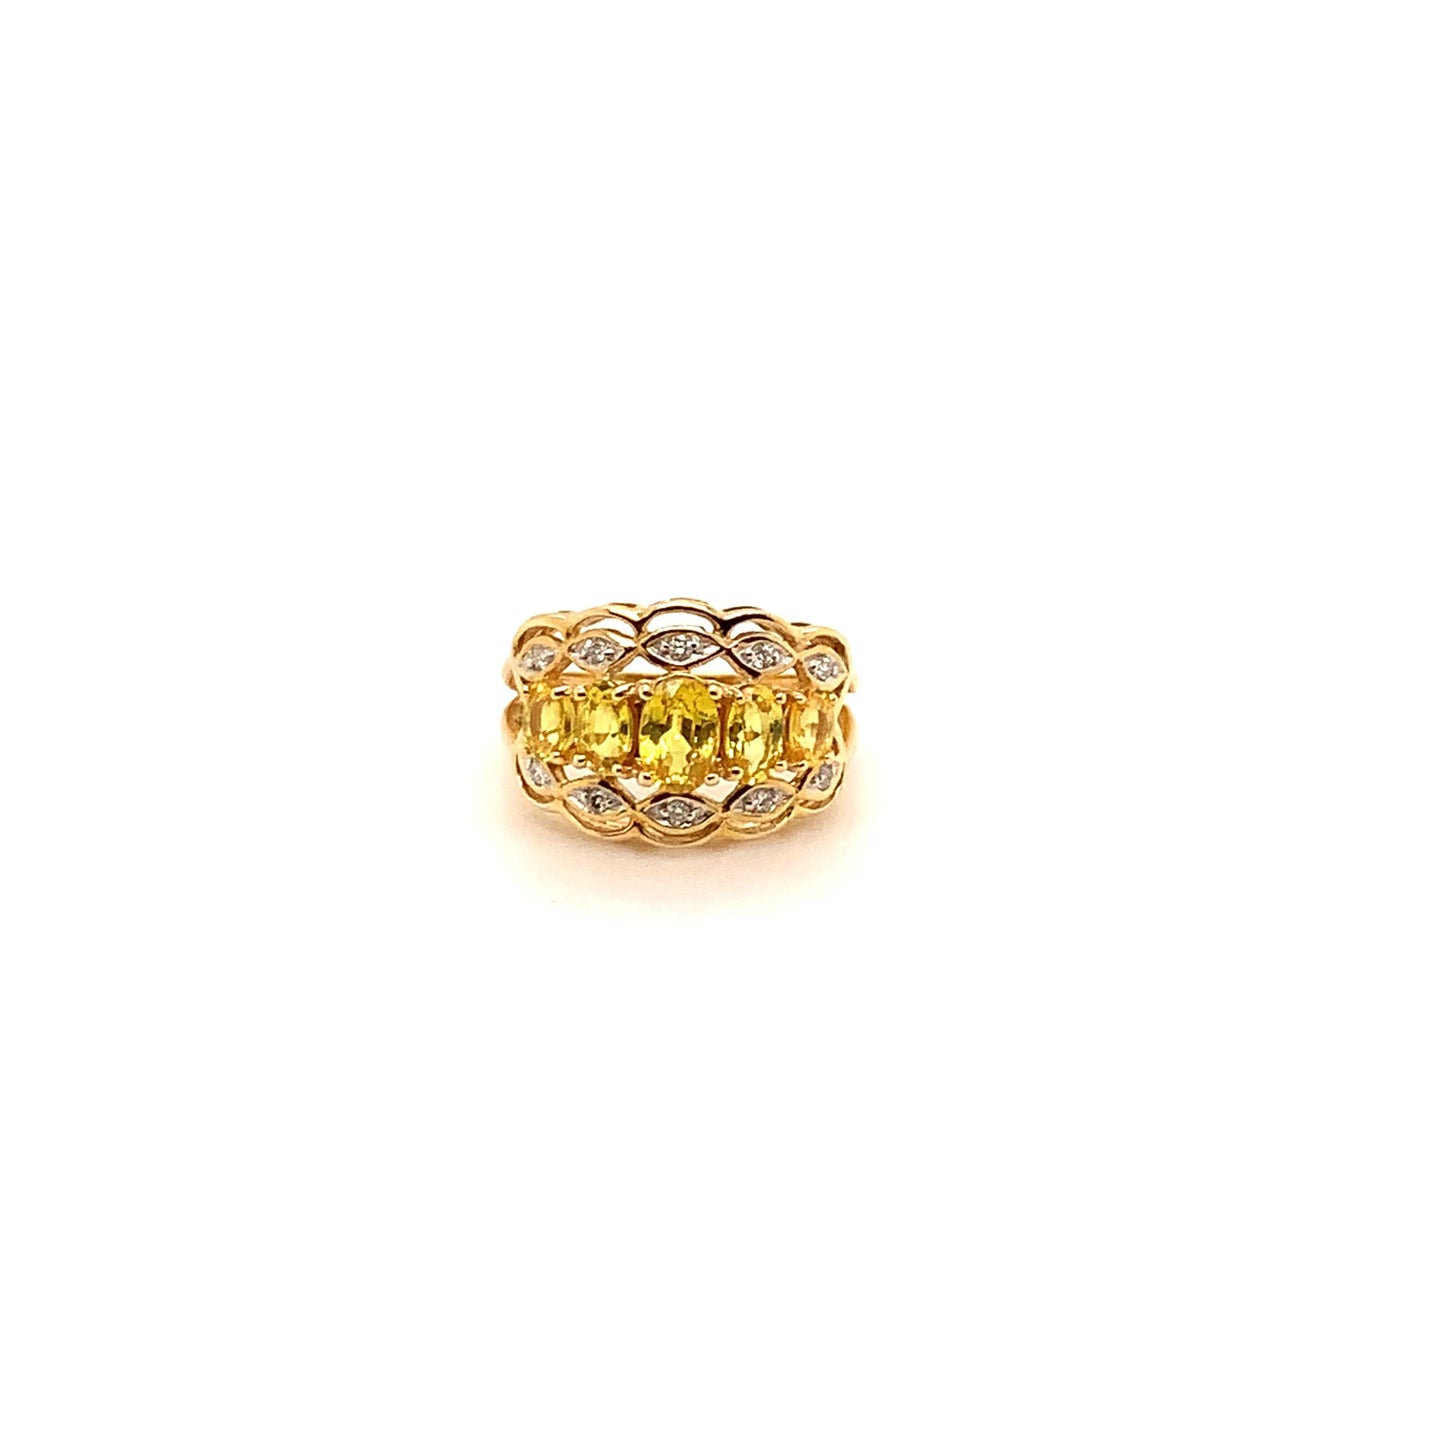 Captivating Oval Cut Citrine and Diamond Ring